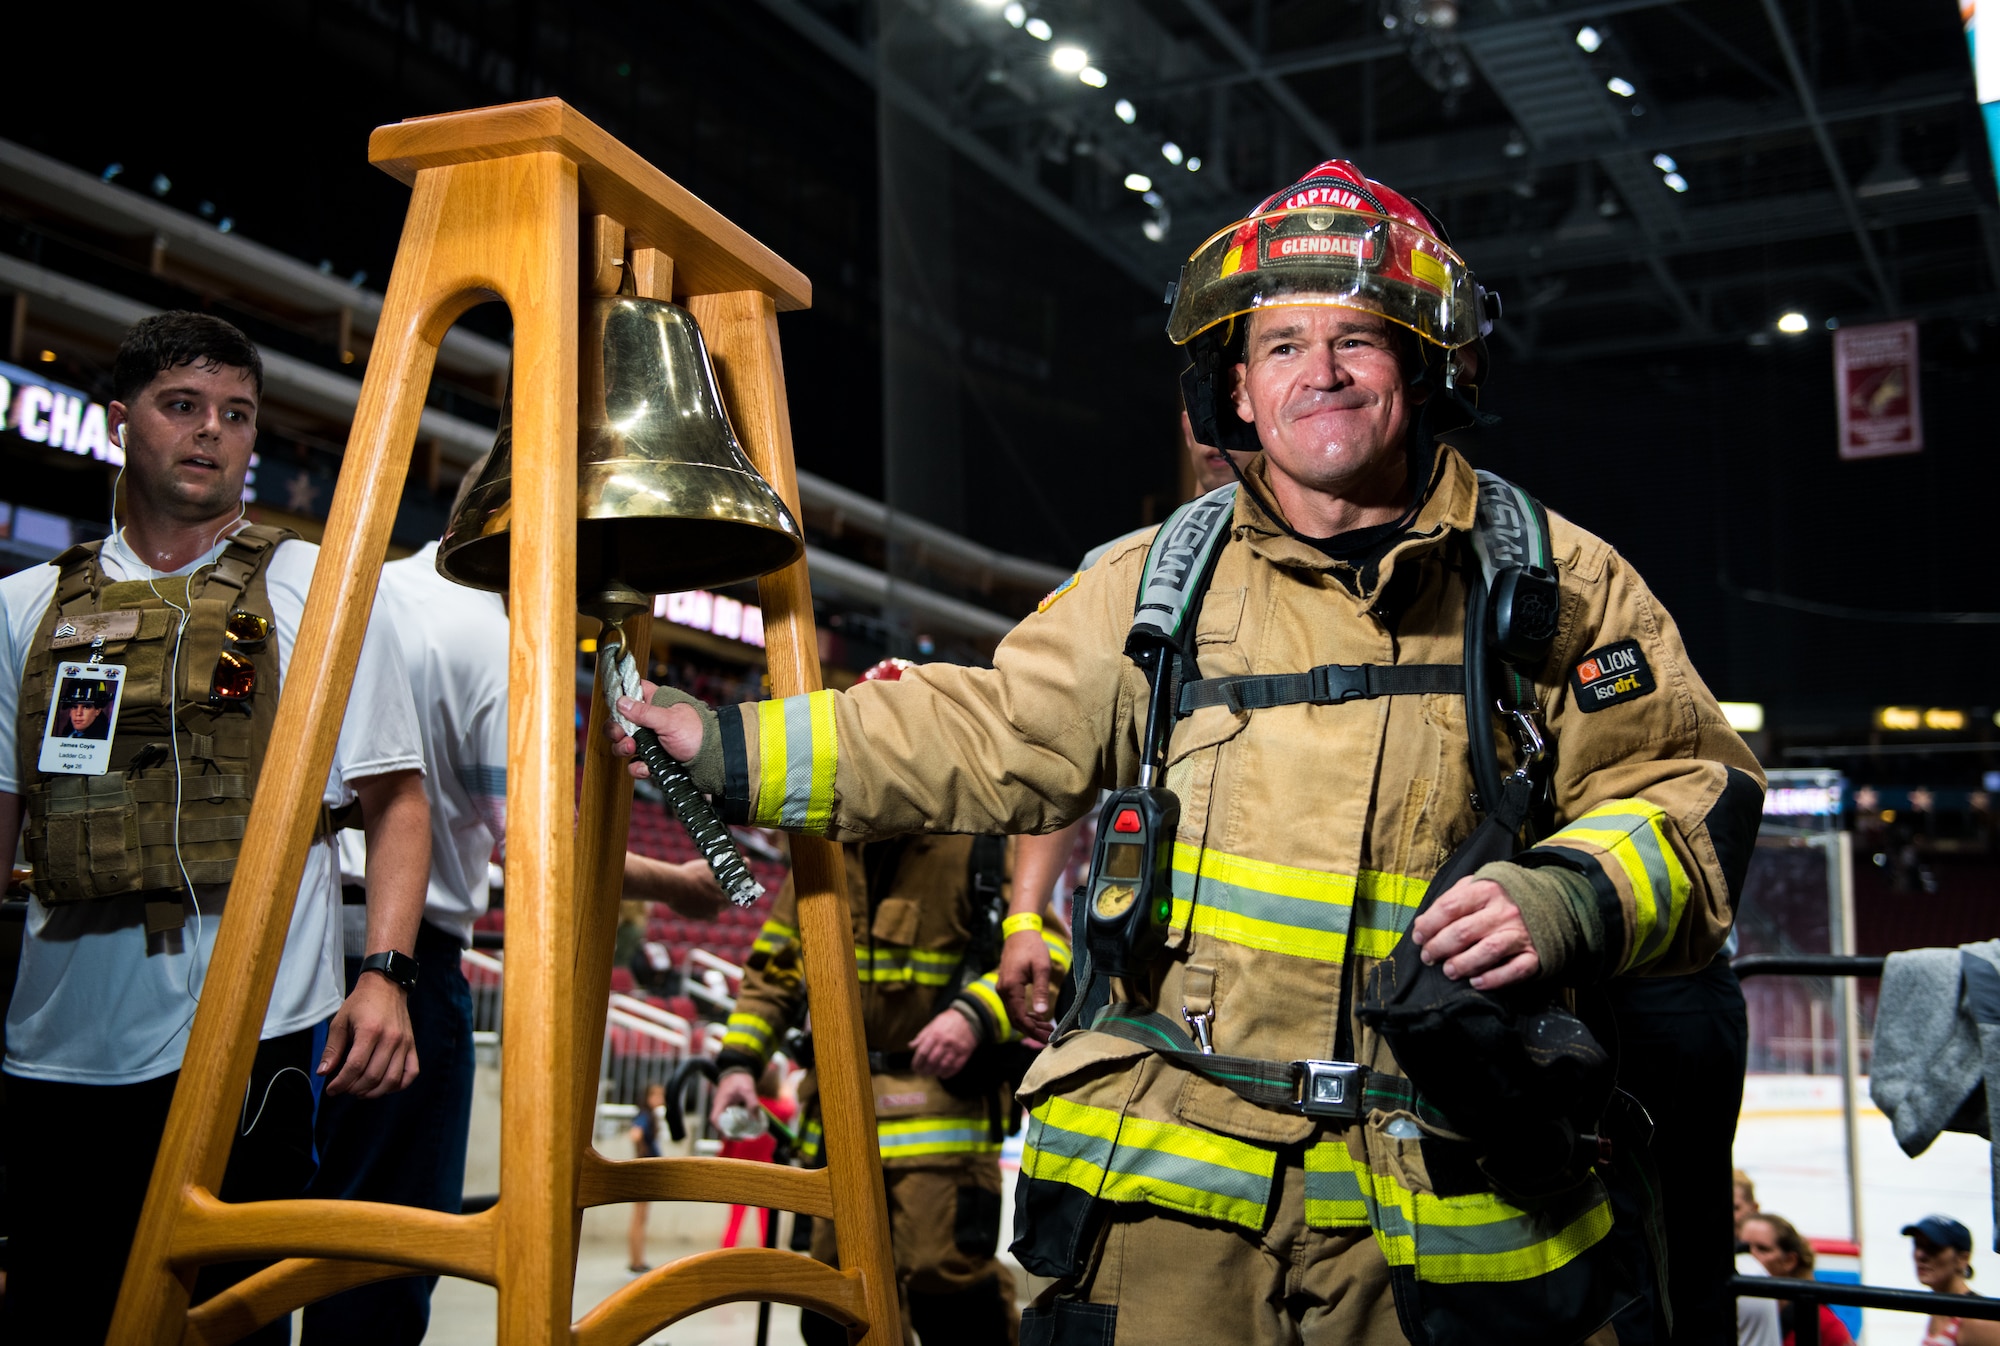 A firefighter from the Glendale Fire Department rings a bell during the 9/11 Tower Challenge Sept. 11, 2019, at the Gila River Arena, Glendale, Ariz.